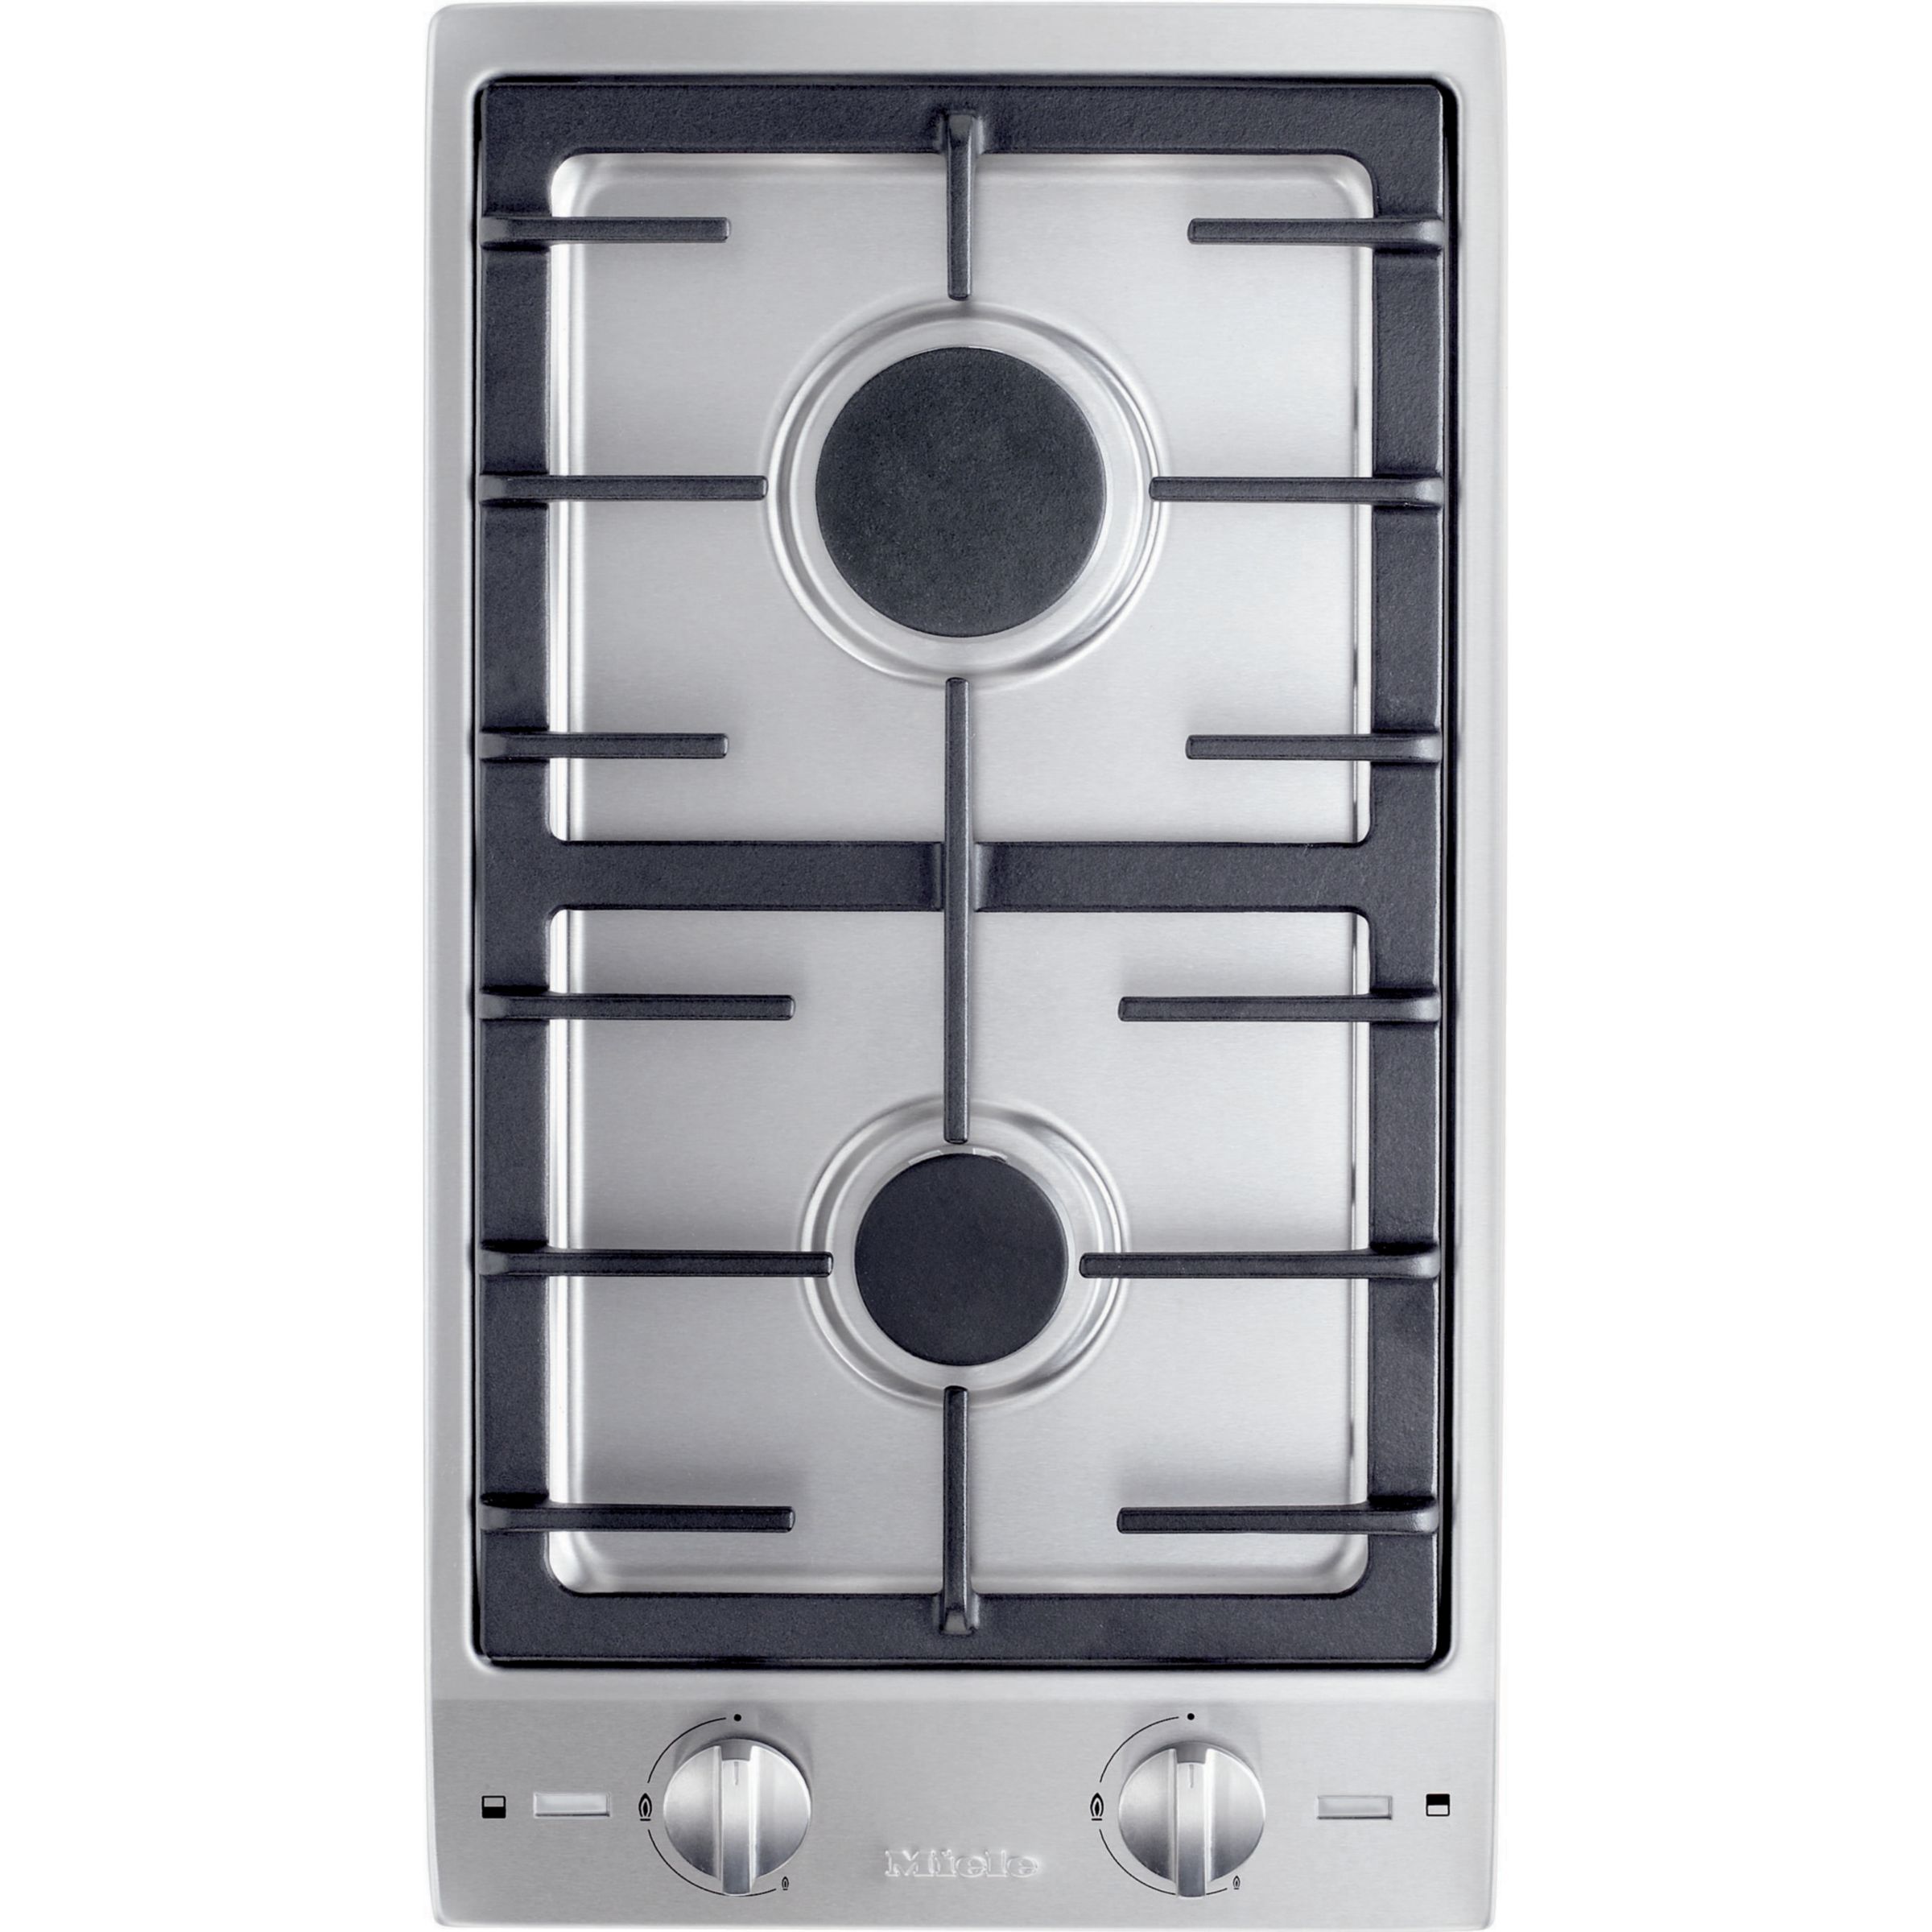 Miele CS1012G Domino Gas Hob, Stainless Steel at John Lewis